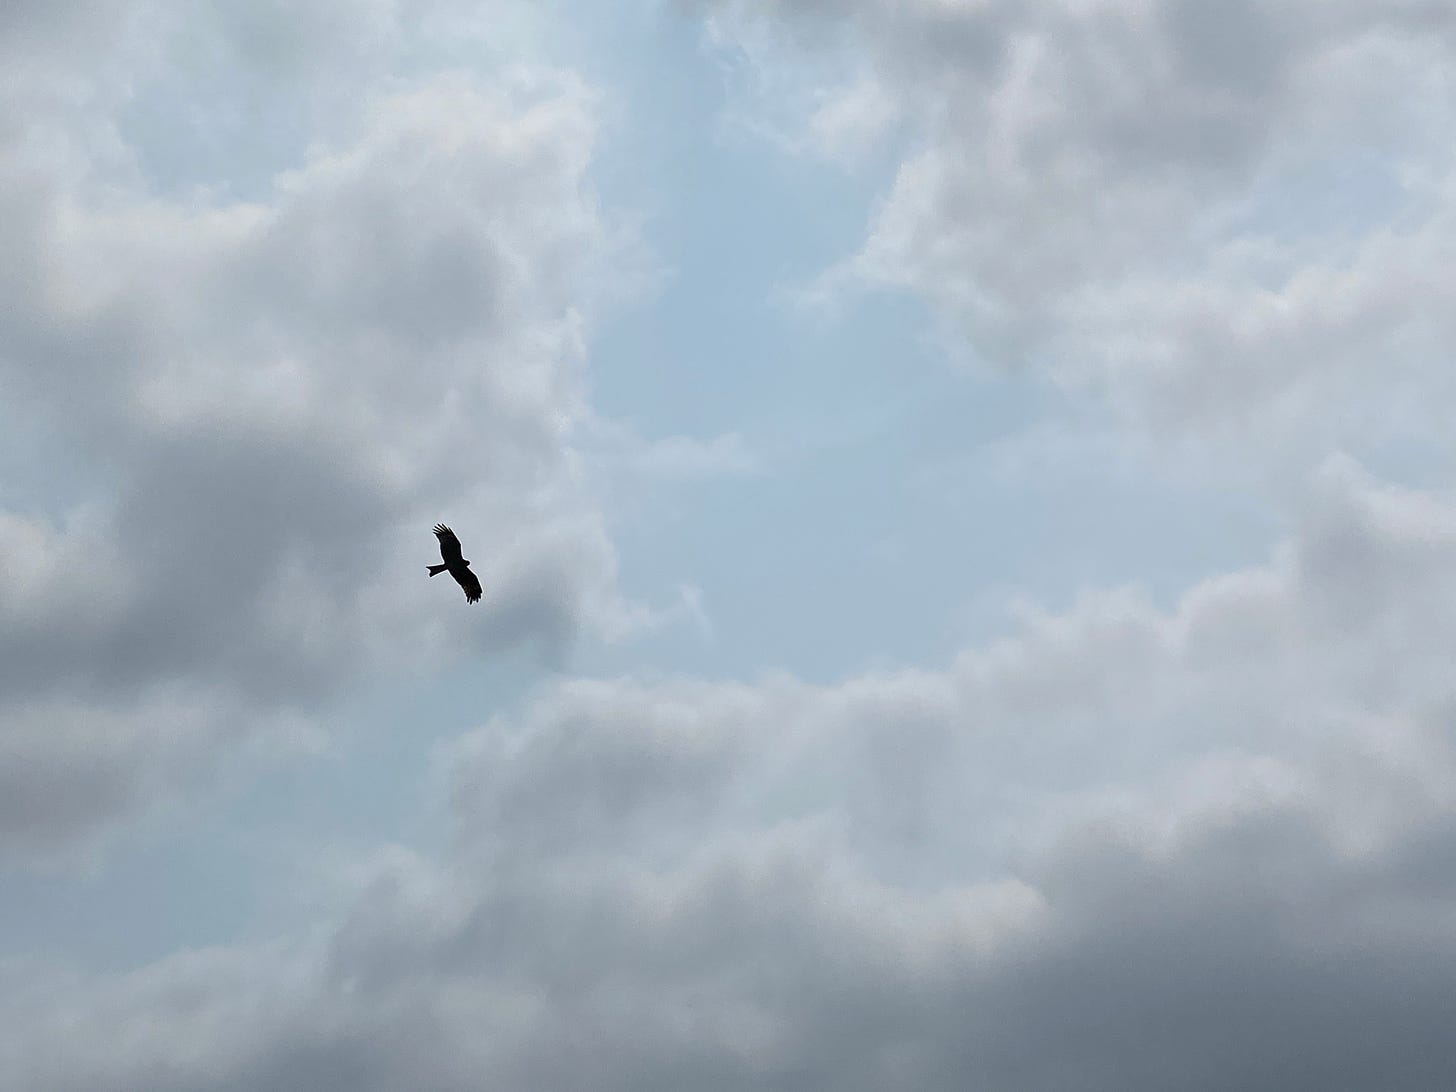 Silhouette photo of a kite (bird) against a cloudy and blue sky